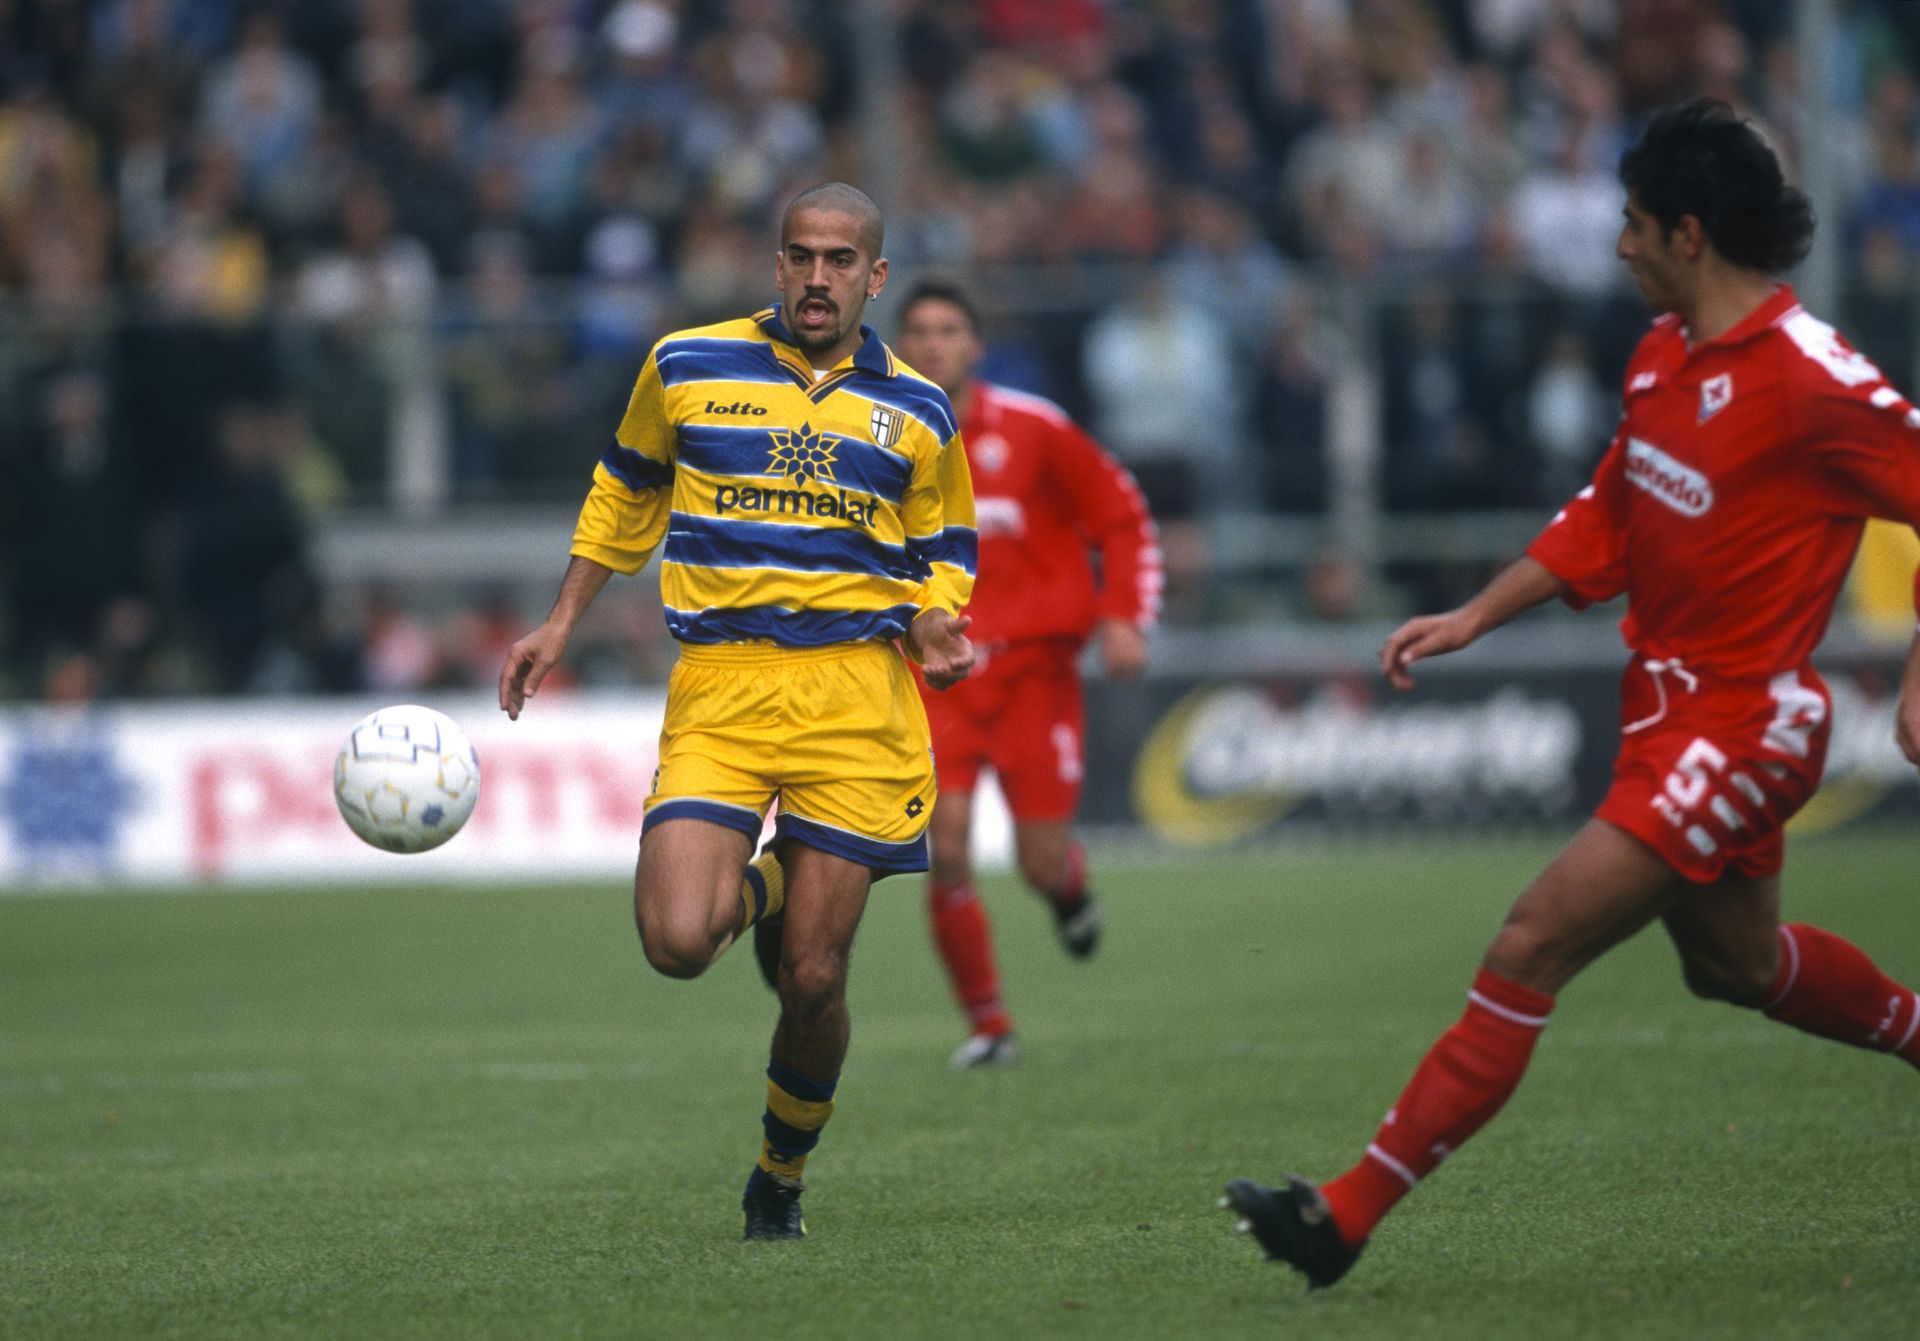 <p>                     Juan Sebastian Veron had short spells at Sampdoria, Parma and Lazio before moving to Manchester United in the summer of 2001.                   </p>                                      <p>                     The former Argentina midfielder joined Parma for around €17.5m million in 1998 and spent just one season with the Gialloblu. It was a memorable one, though, as Alberto Malesani's side won both the Coppa Italia and the UEFA Cup.                   </p>